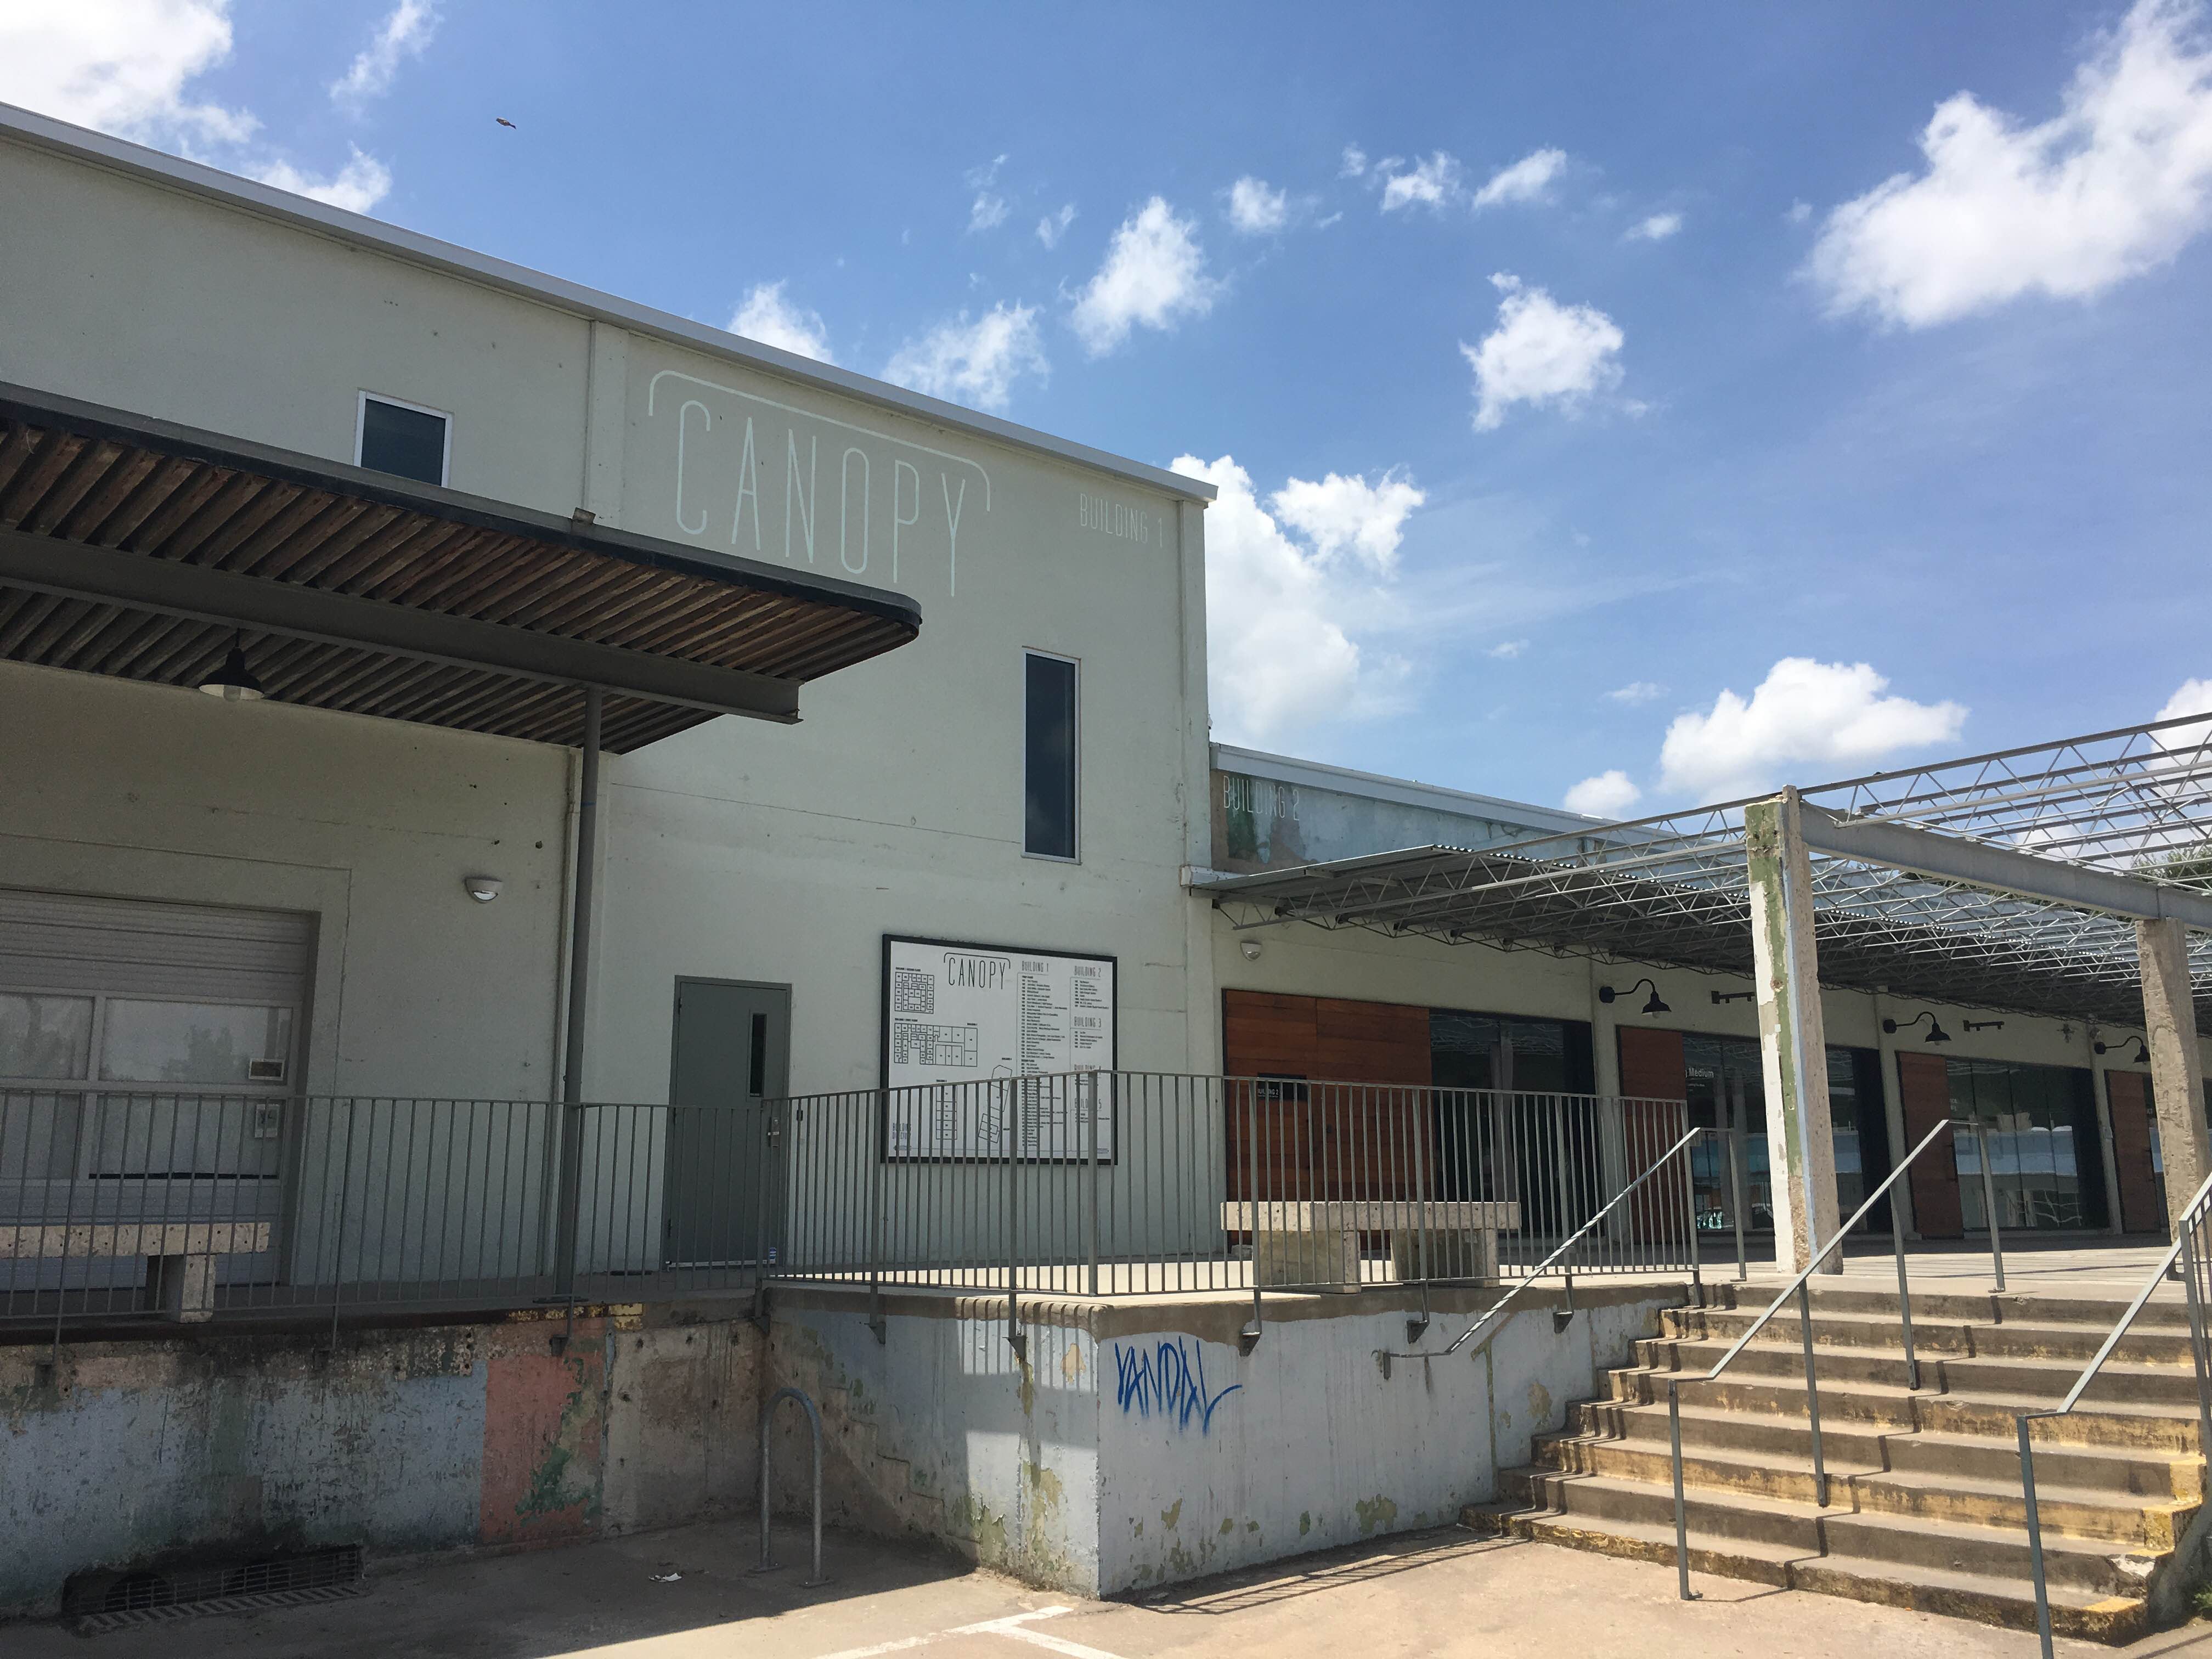 Canopy, located at 916 Springdale Rd, is home to Big Medium and is considered by some to be a pillar of the East Austin Art scene.